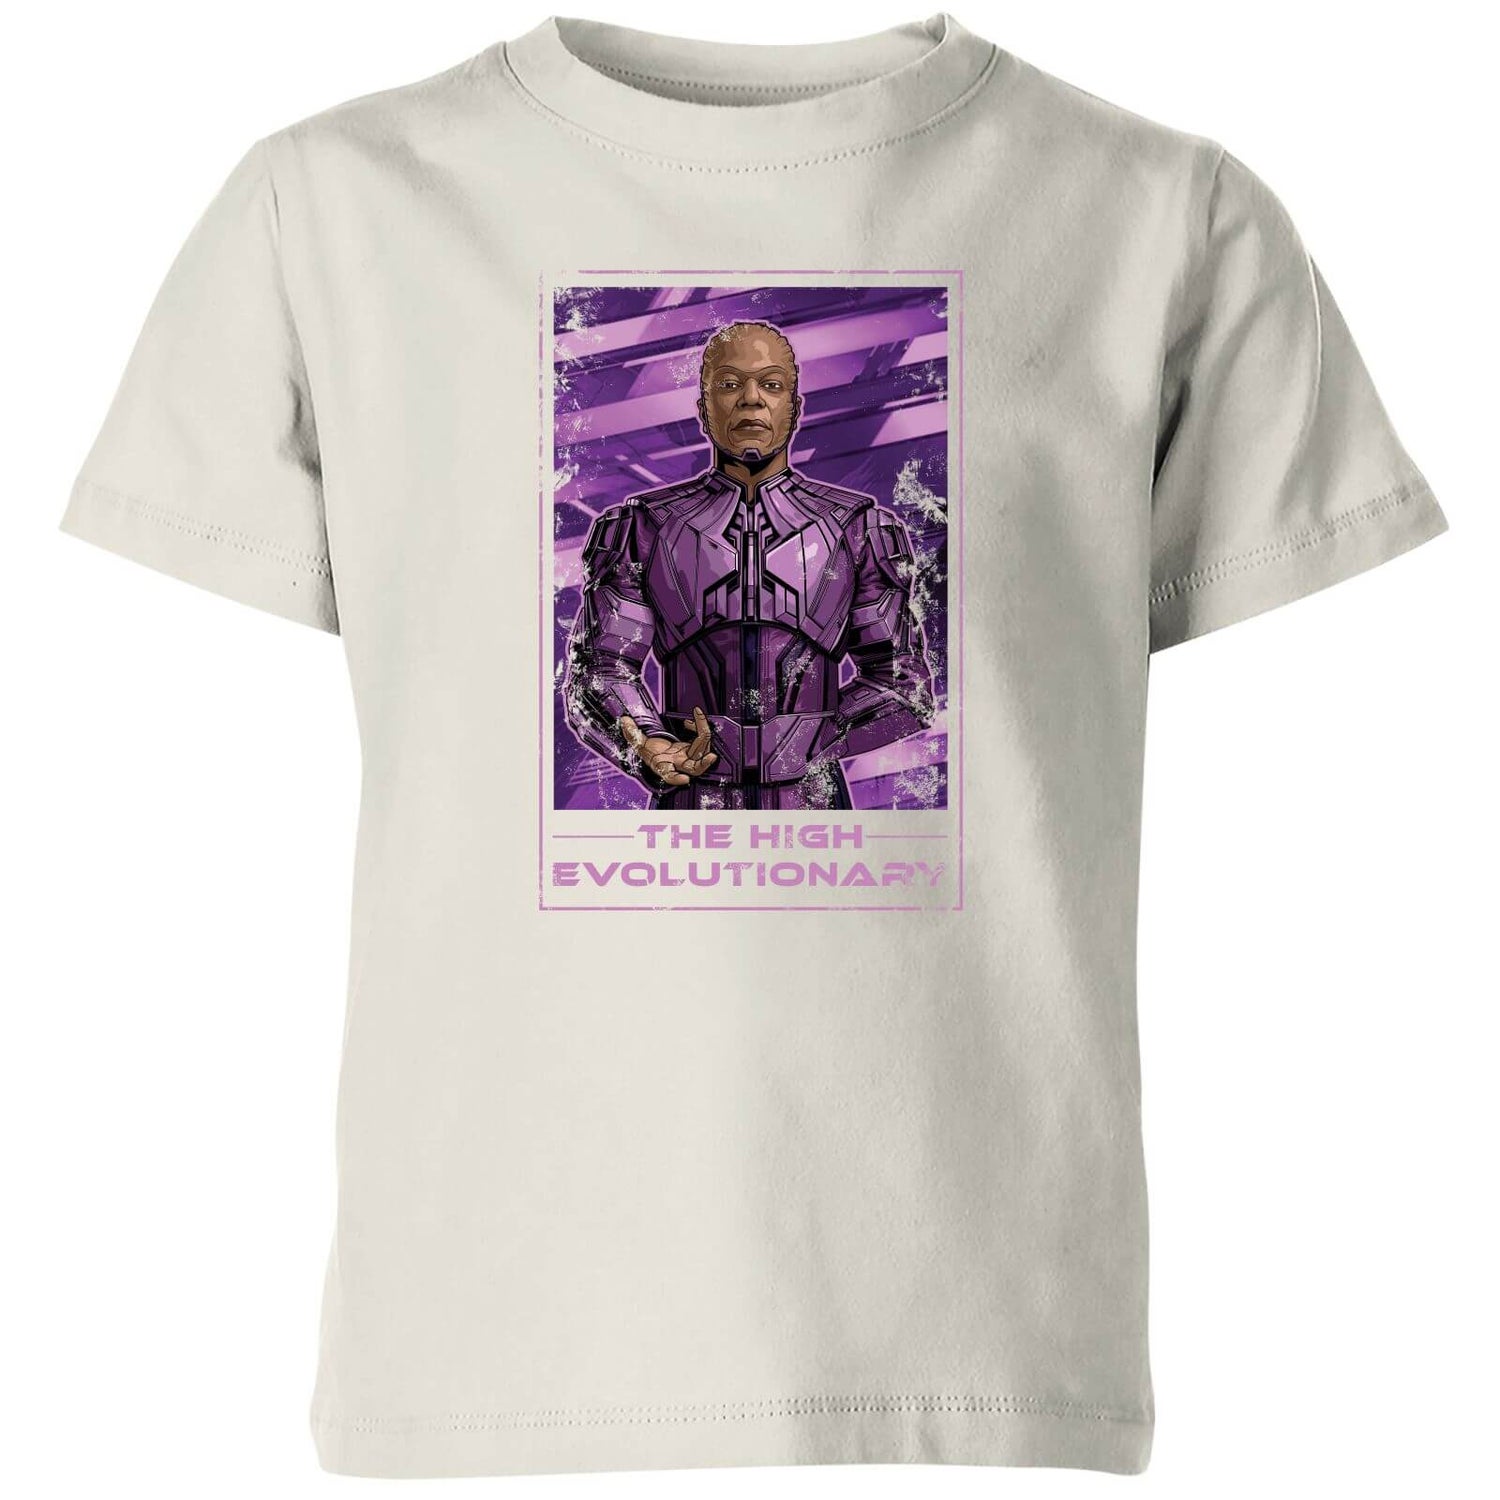 Guardians of the Galaxy The High Evolutionary Kids' T-Shirt - Cream